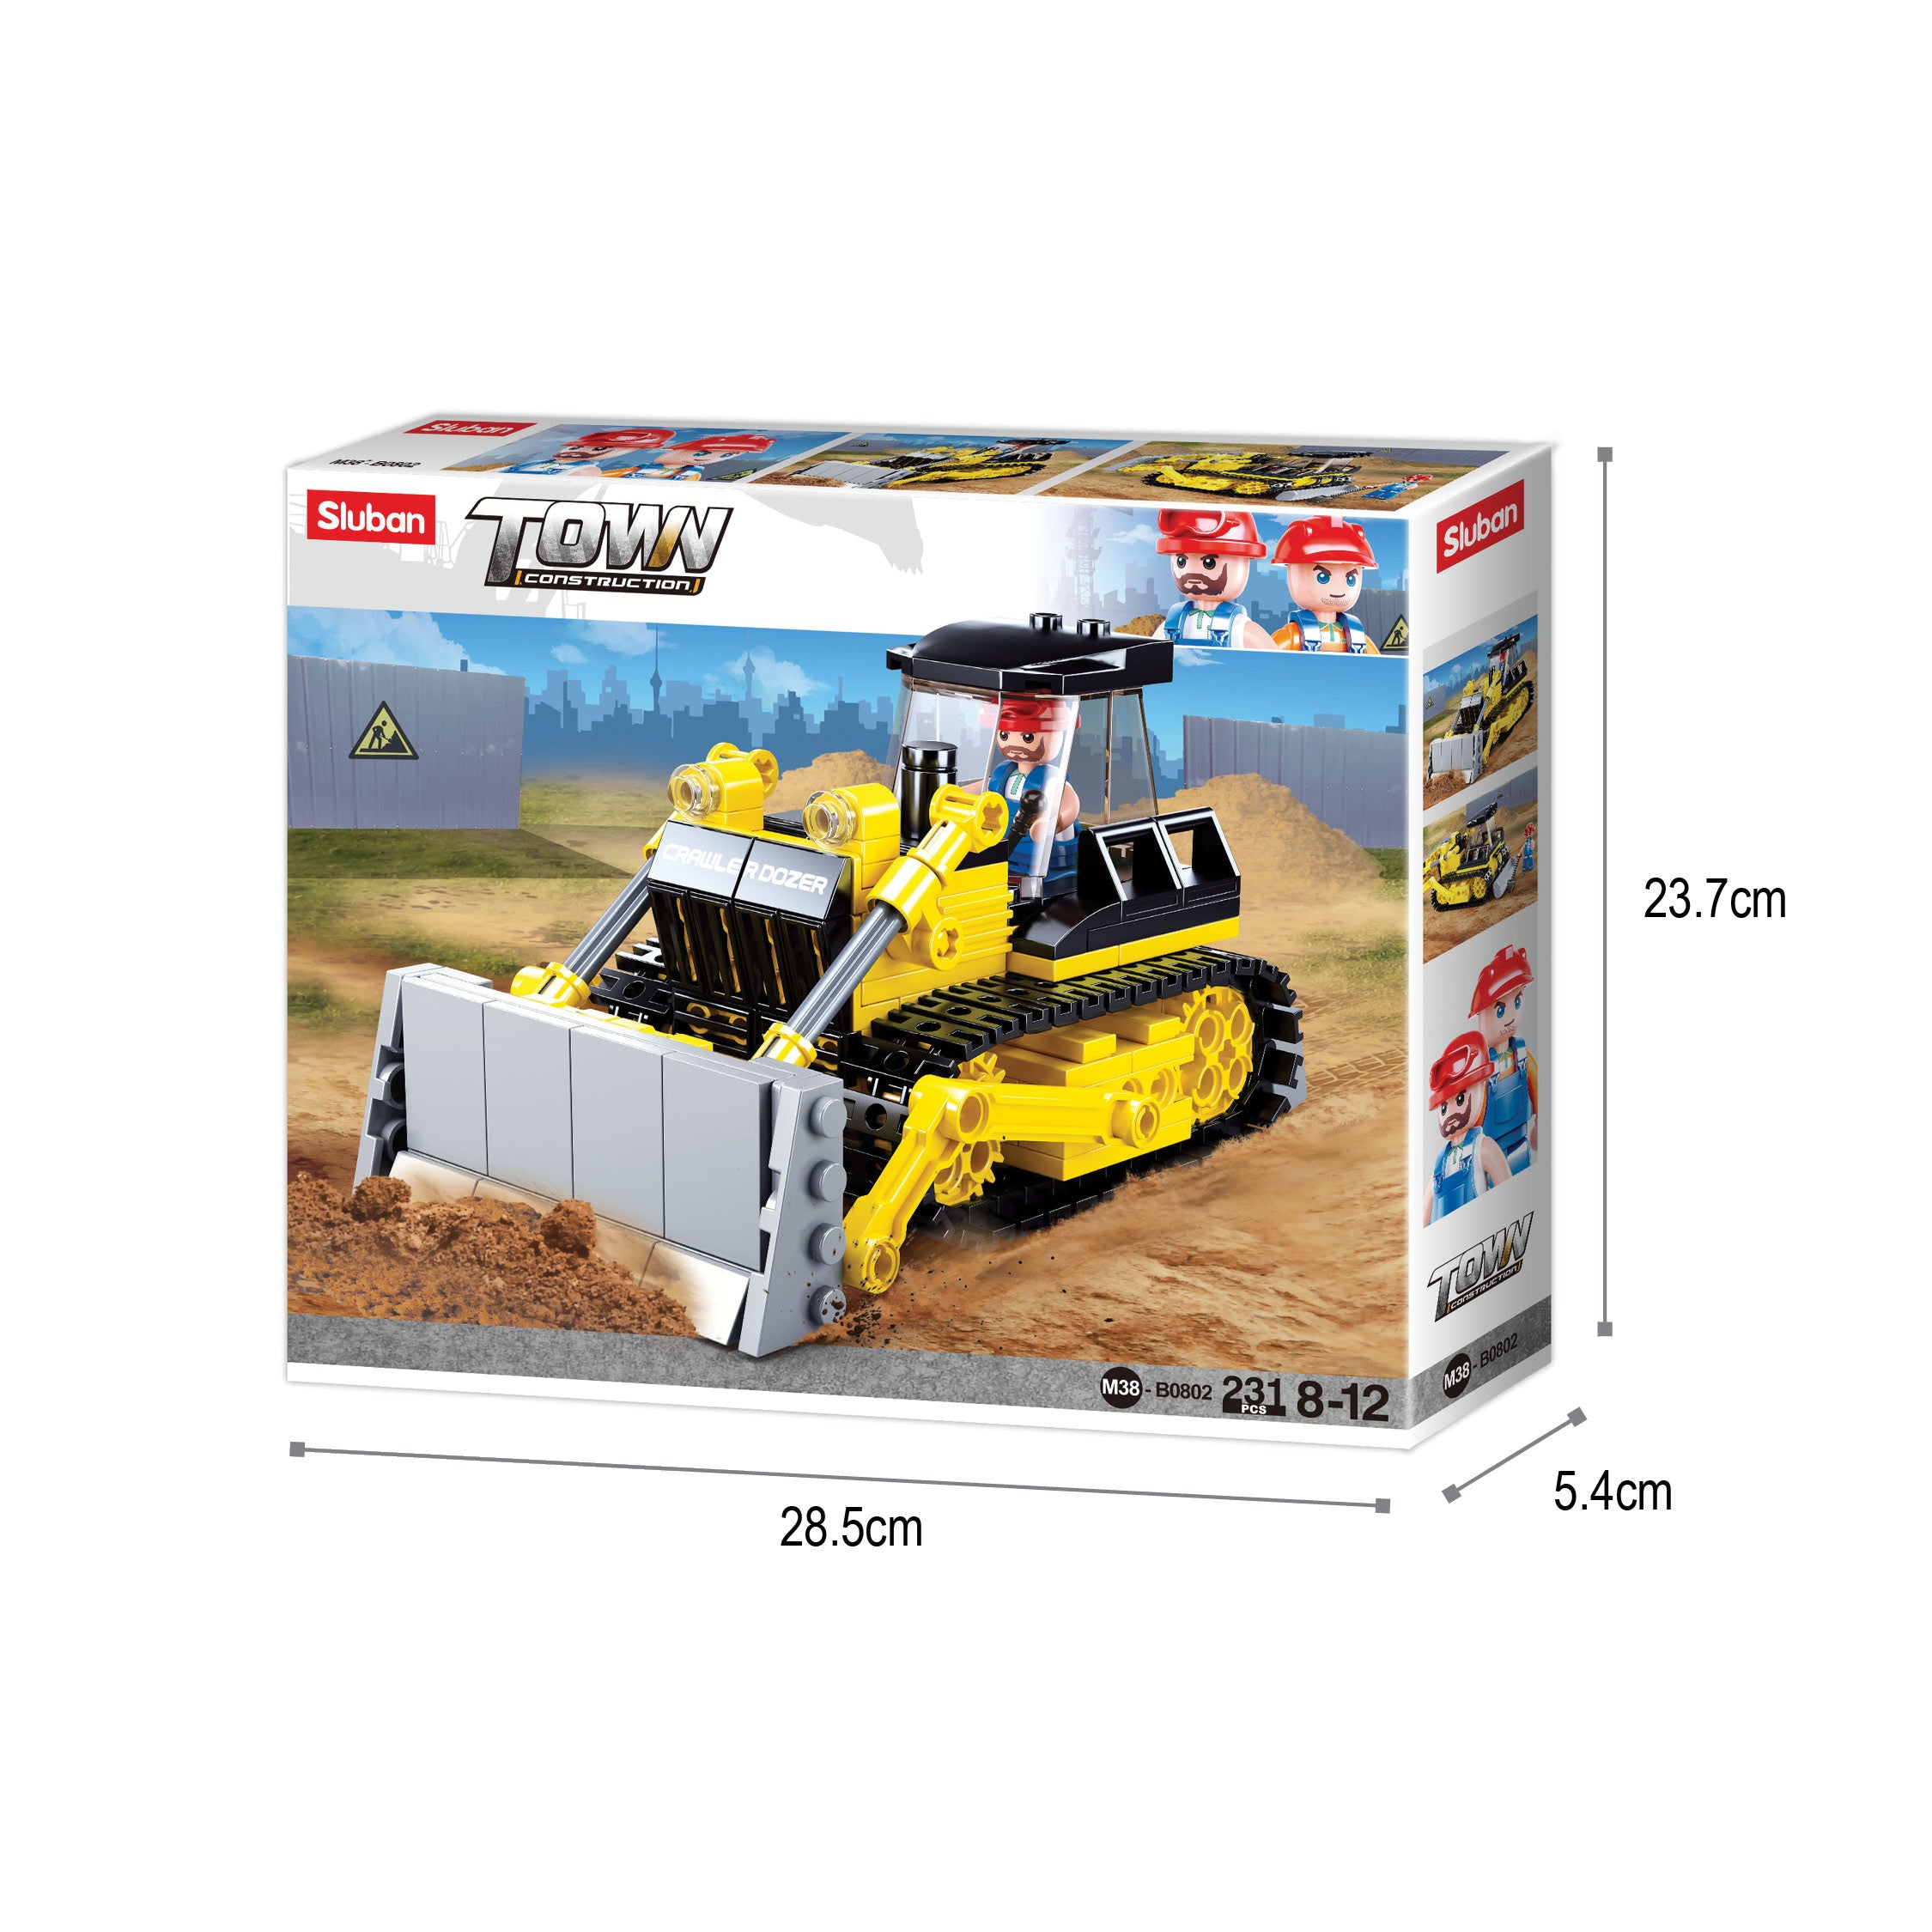 Sluban® Bulldozer (M38-B0802) (231 Pieces) Building Blocks Kit For Boys Aged 8 Years And Above Creative Construction Set Educational Stem Toy, Ideal For Gifting Birthday Gift Return Gift, Blocks Compatible With Other Leading Brands, Bis Certified.